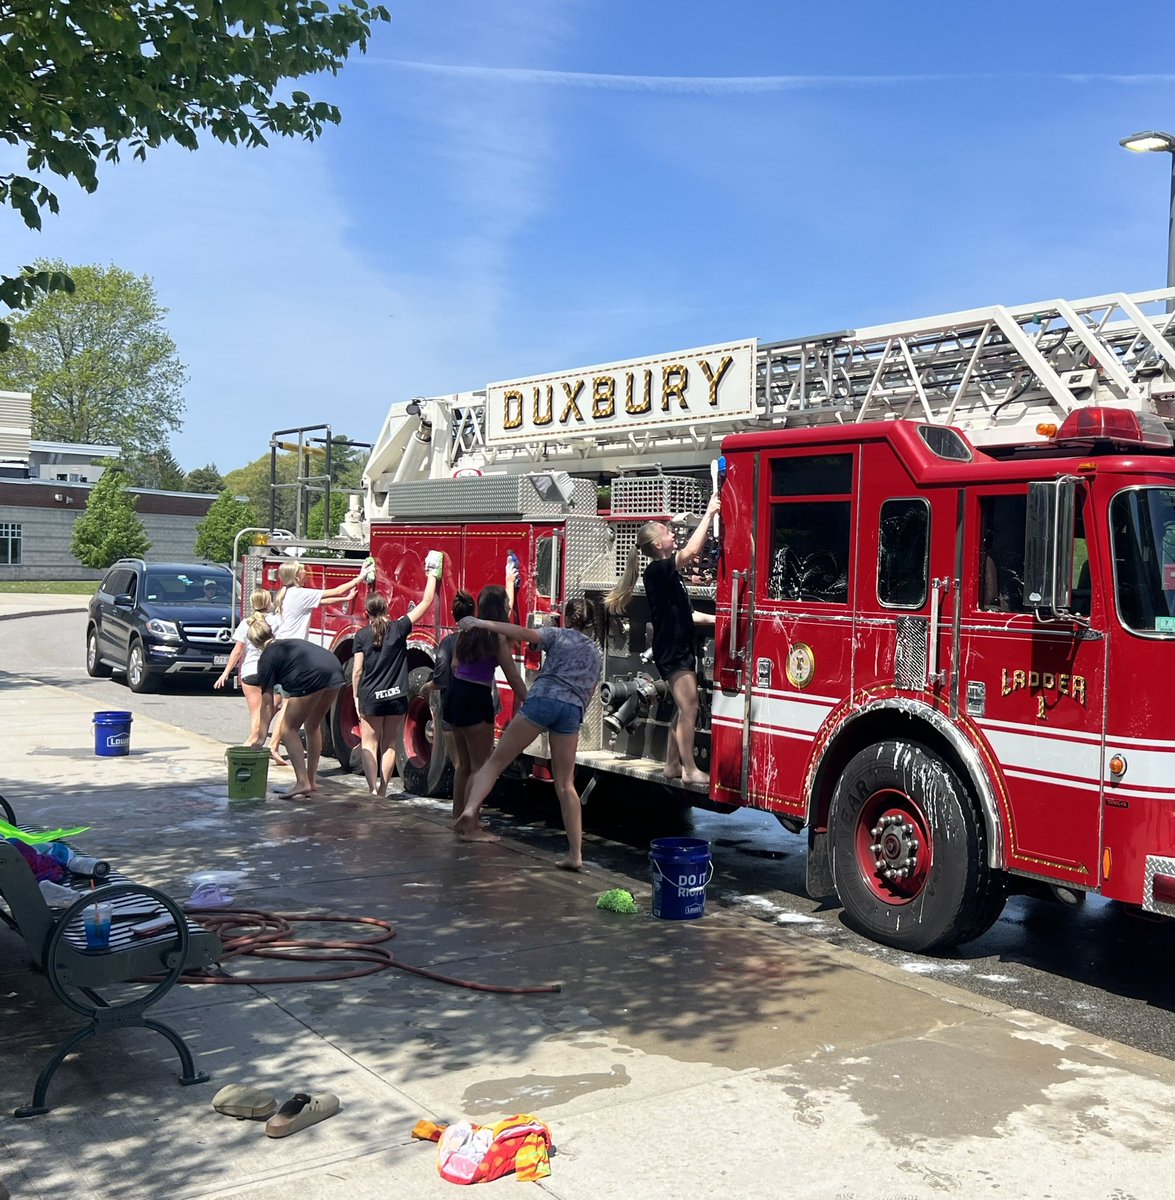 Duxbury firefighters couldn’t pass up the chance to help out the Duxbury girls golf team at their fundraiser today! Thanks for washing our ladder truck on this beautiful weekend. #DXFD members supporting the community who supports us!